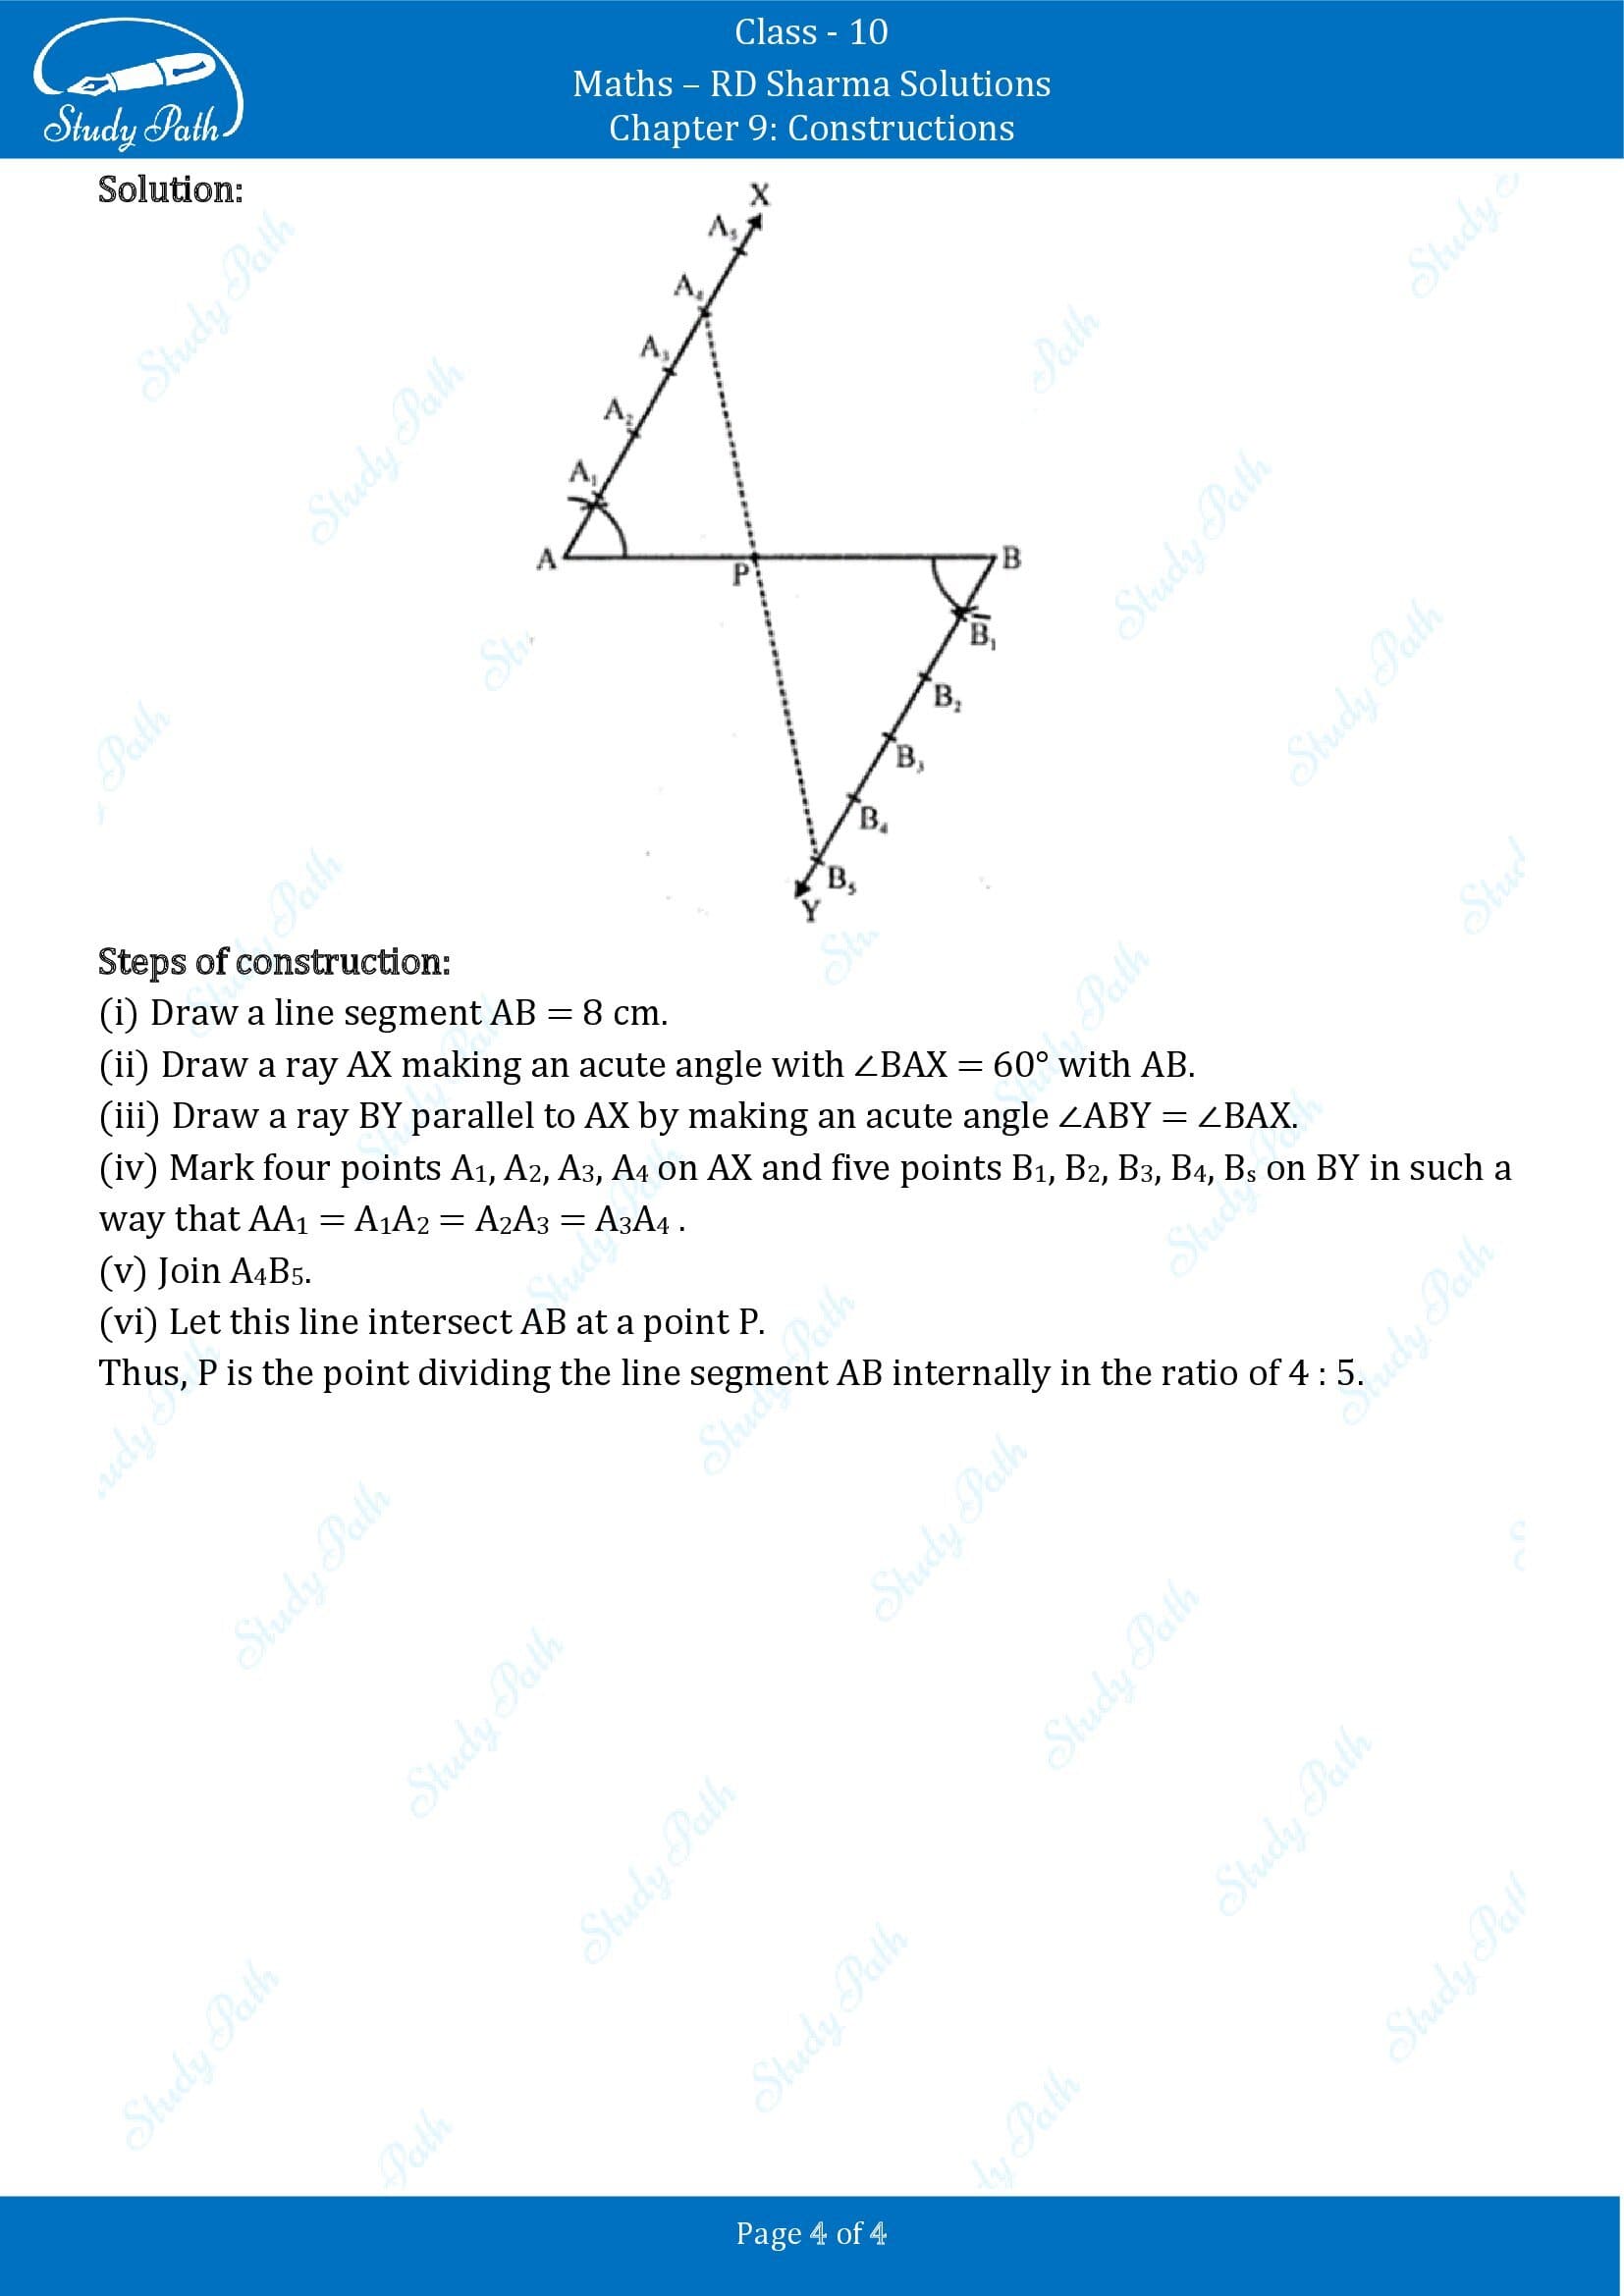 RD Sharma Solutions Class 10 Chapter 9 Constructions Exercise 9.1 00004